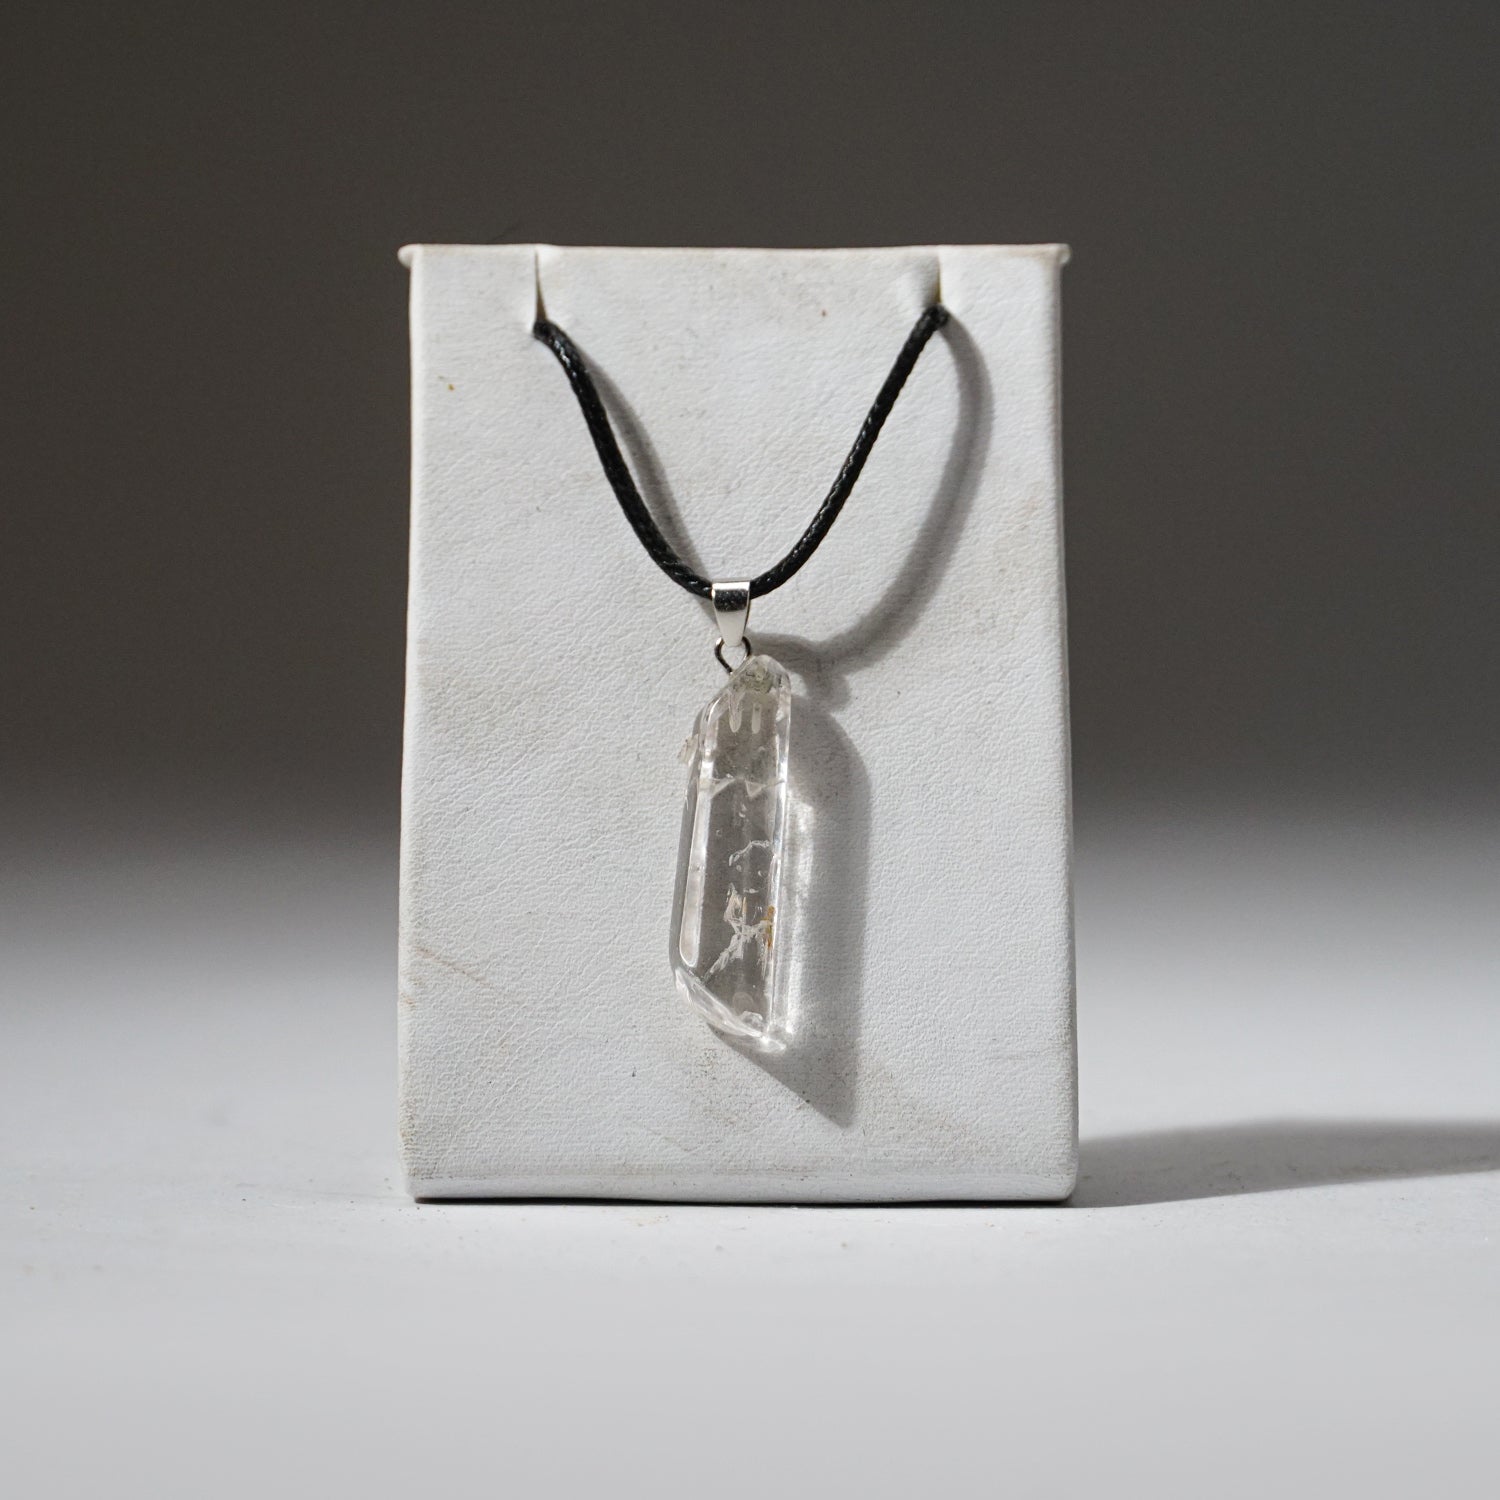 Genuine Polished Clear Quartz Crystal Pendant with Cord Necklace